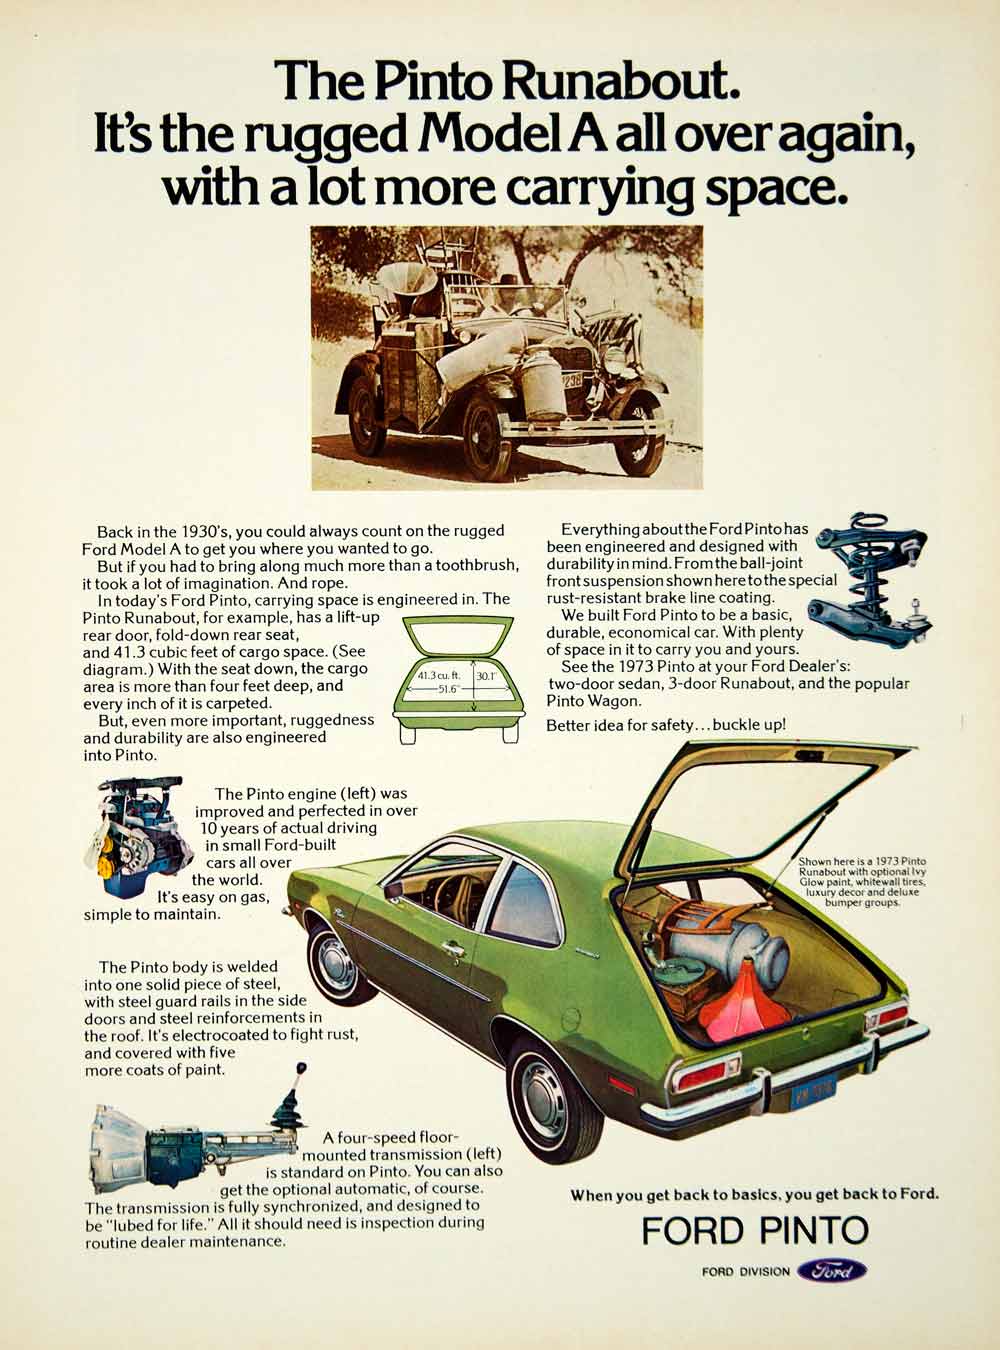 1973 Ad Ford Pinto 3Door Hatchback Subcompact Car Runabout Ivy Glow Paint YCD9